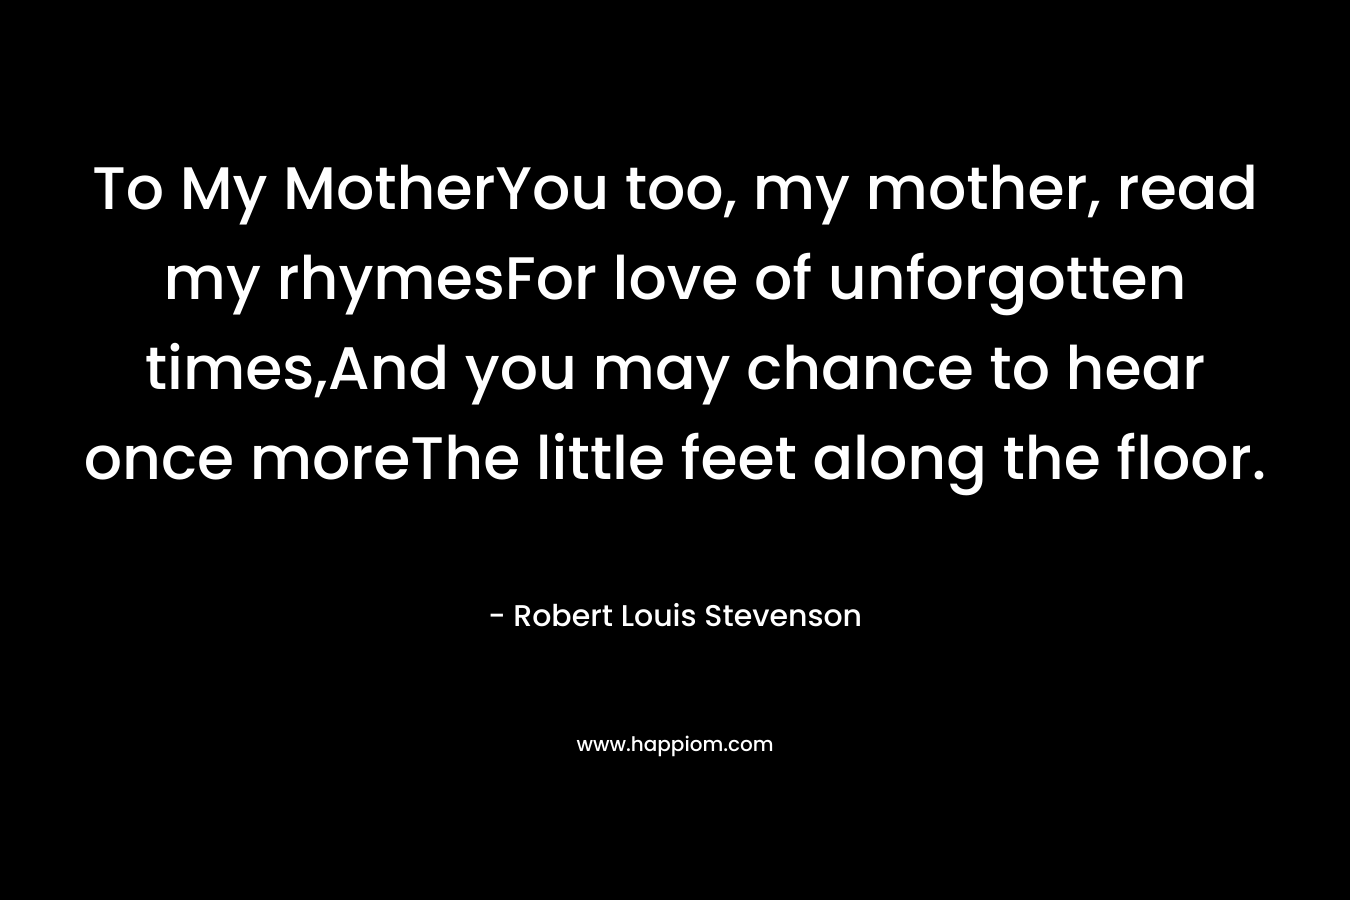 To My MotherYou too, my mother, read my rhymesFor love of unforgotten times,And you may chance to hear once moreThe little feet along the floor. – Robert Louis Stevenson